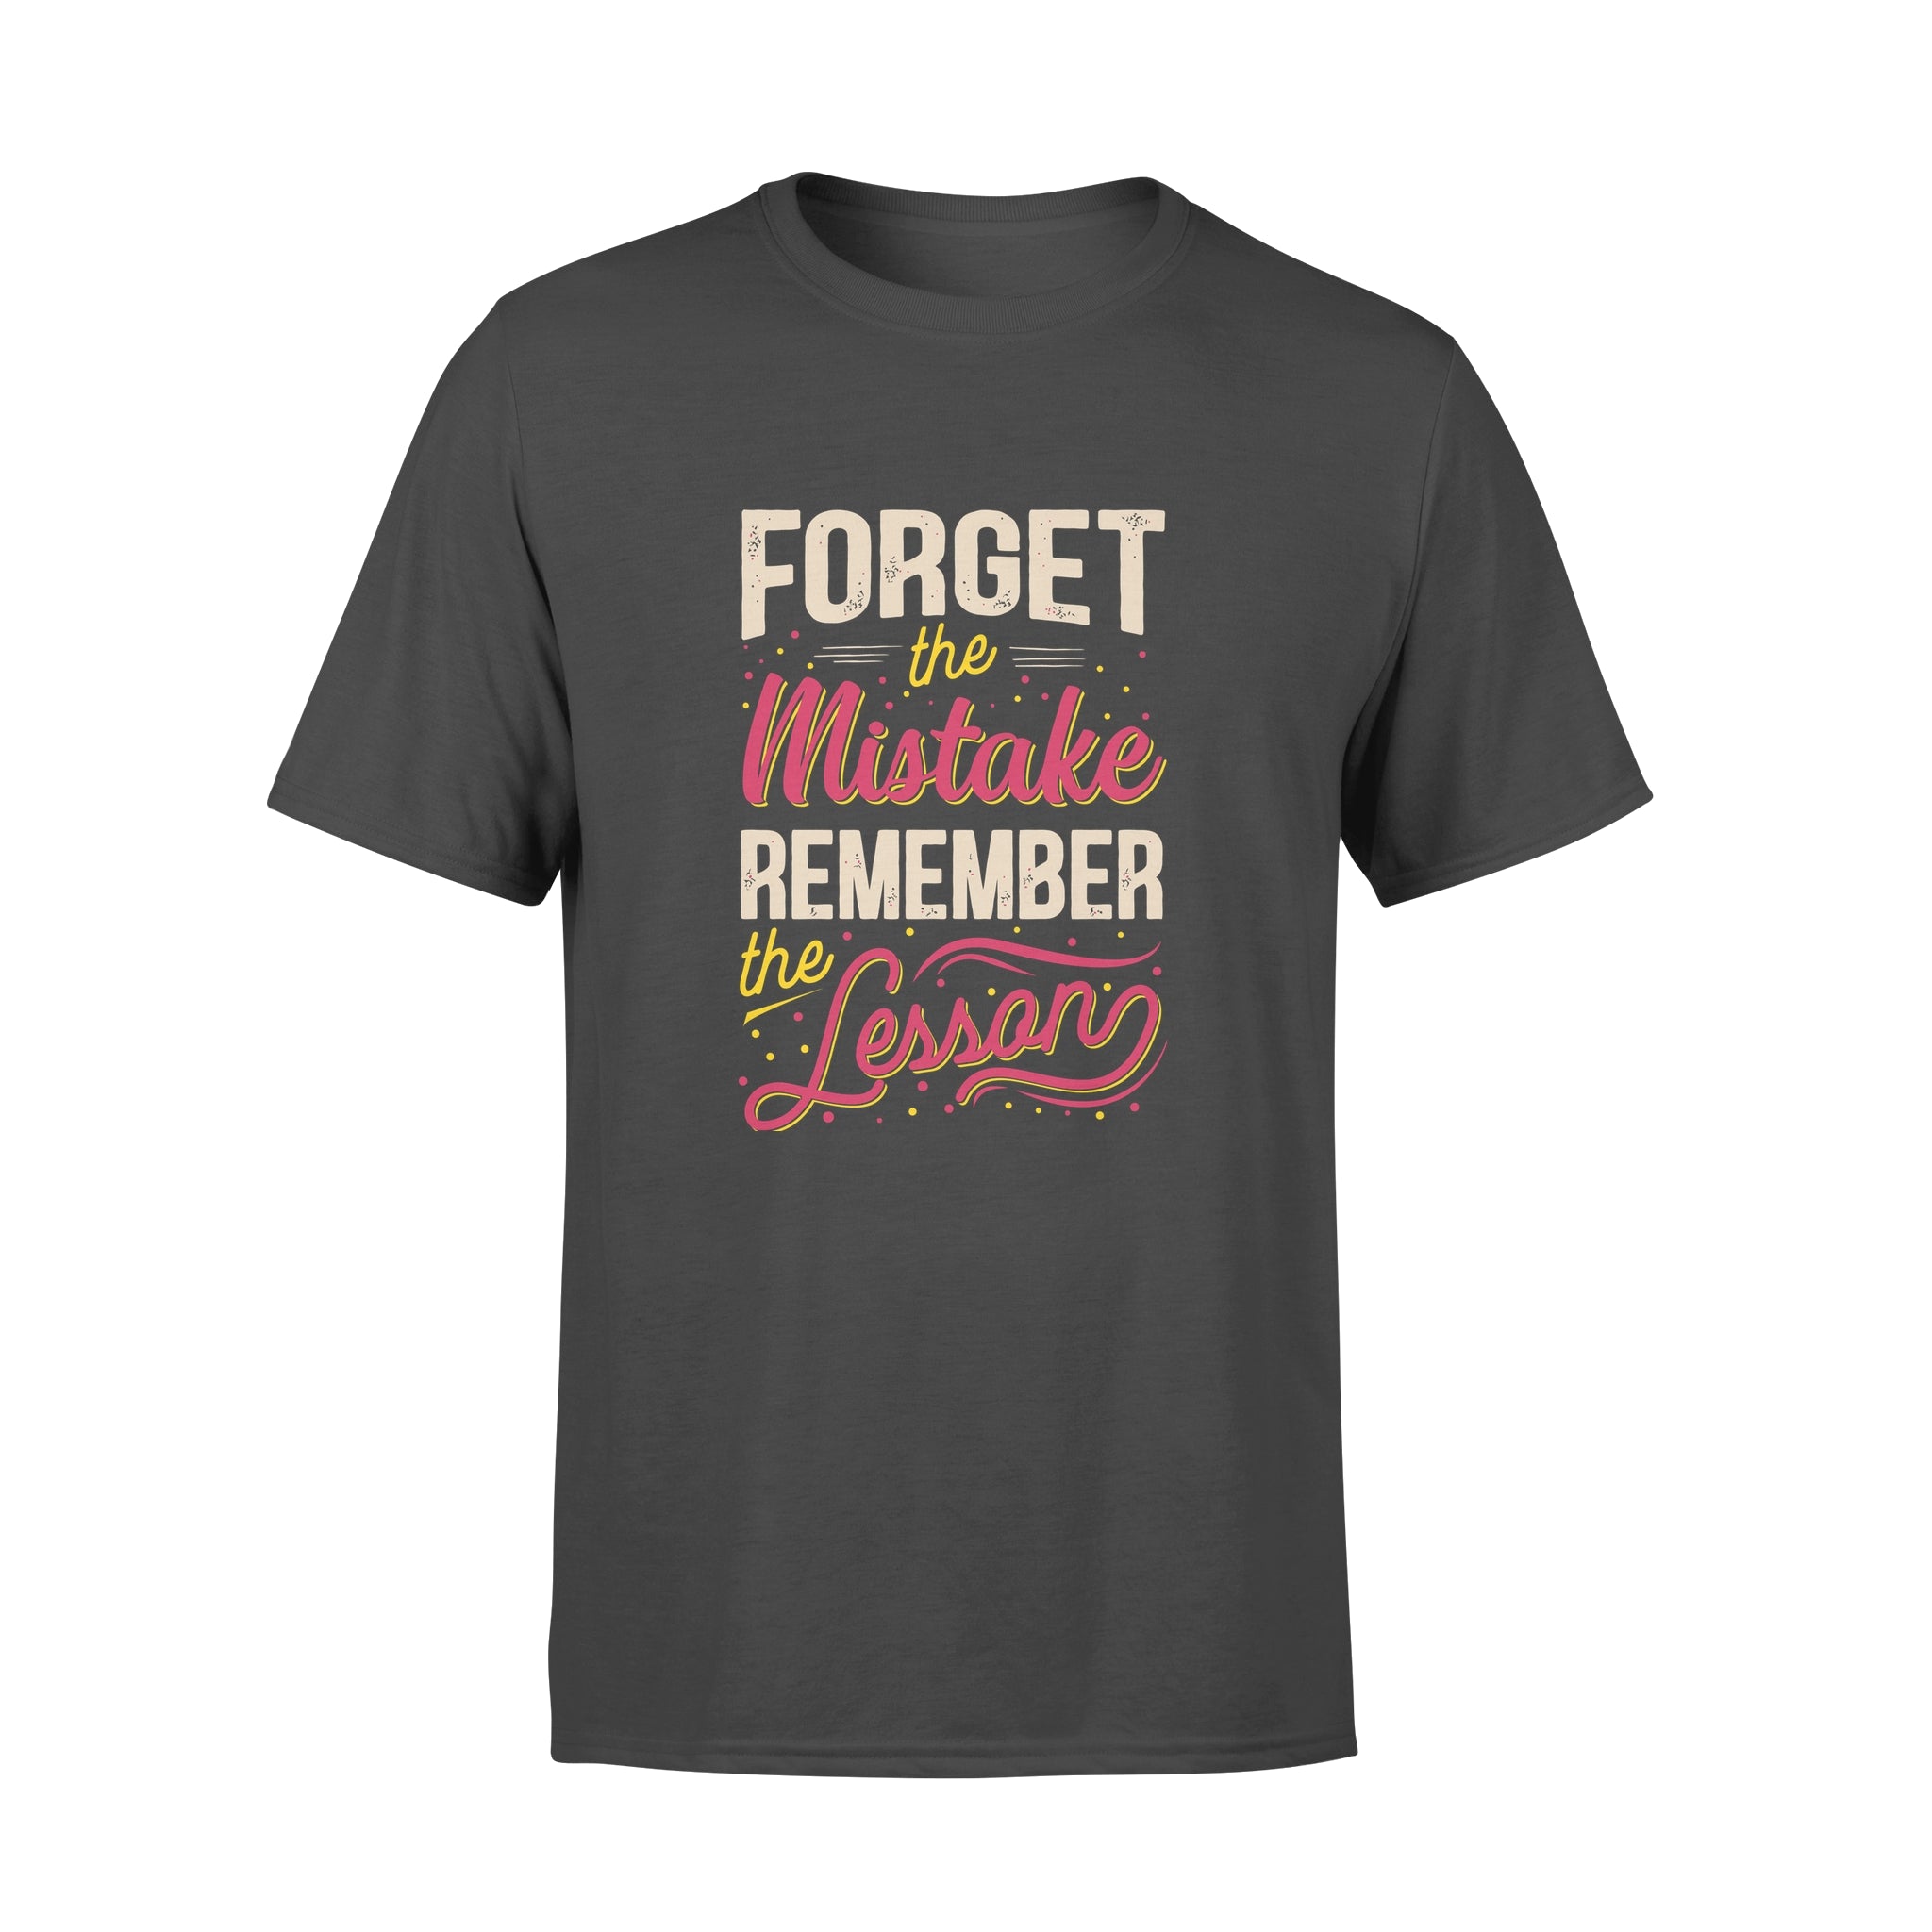 Forget The Mistake Remember The Lesson - T-shirt